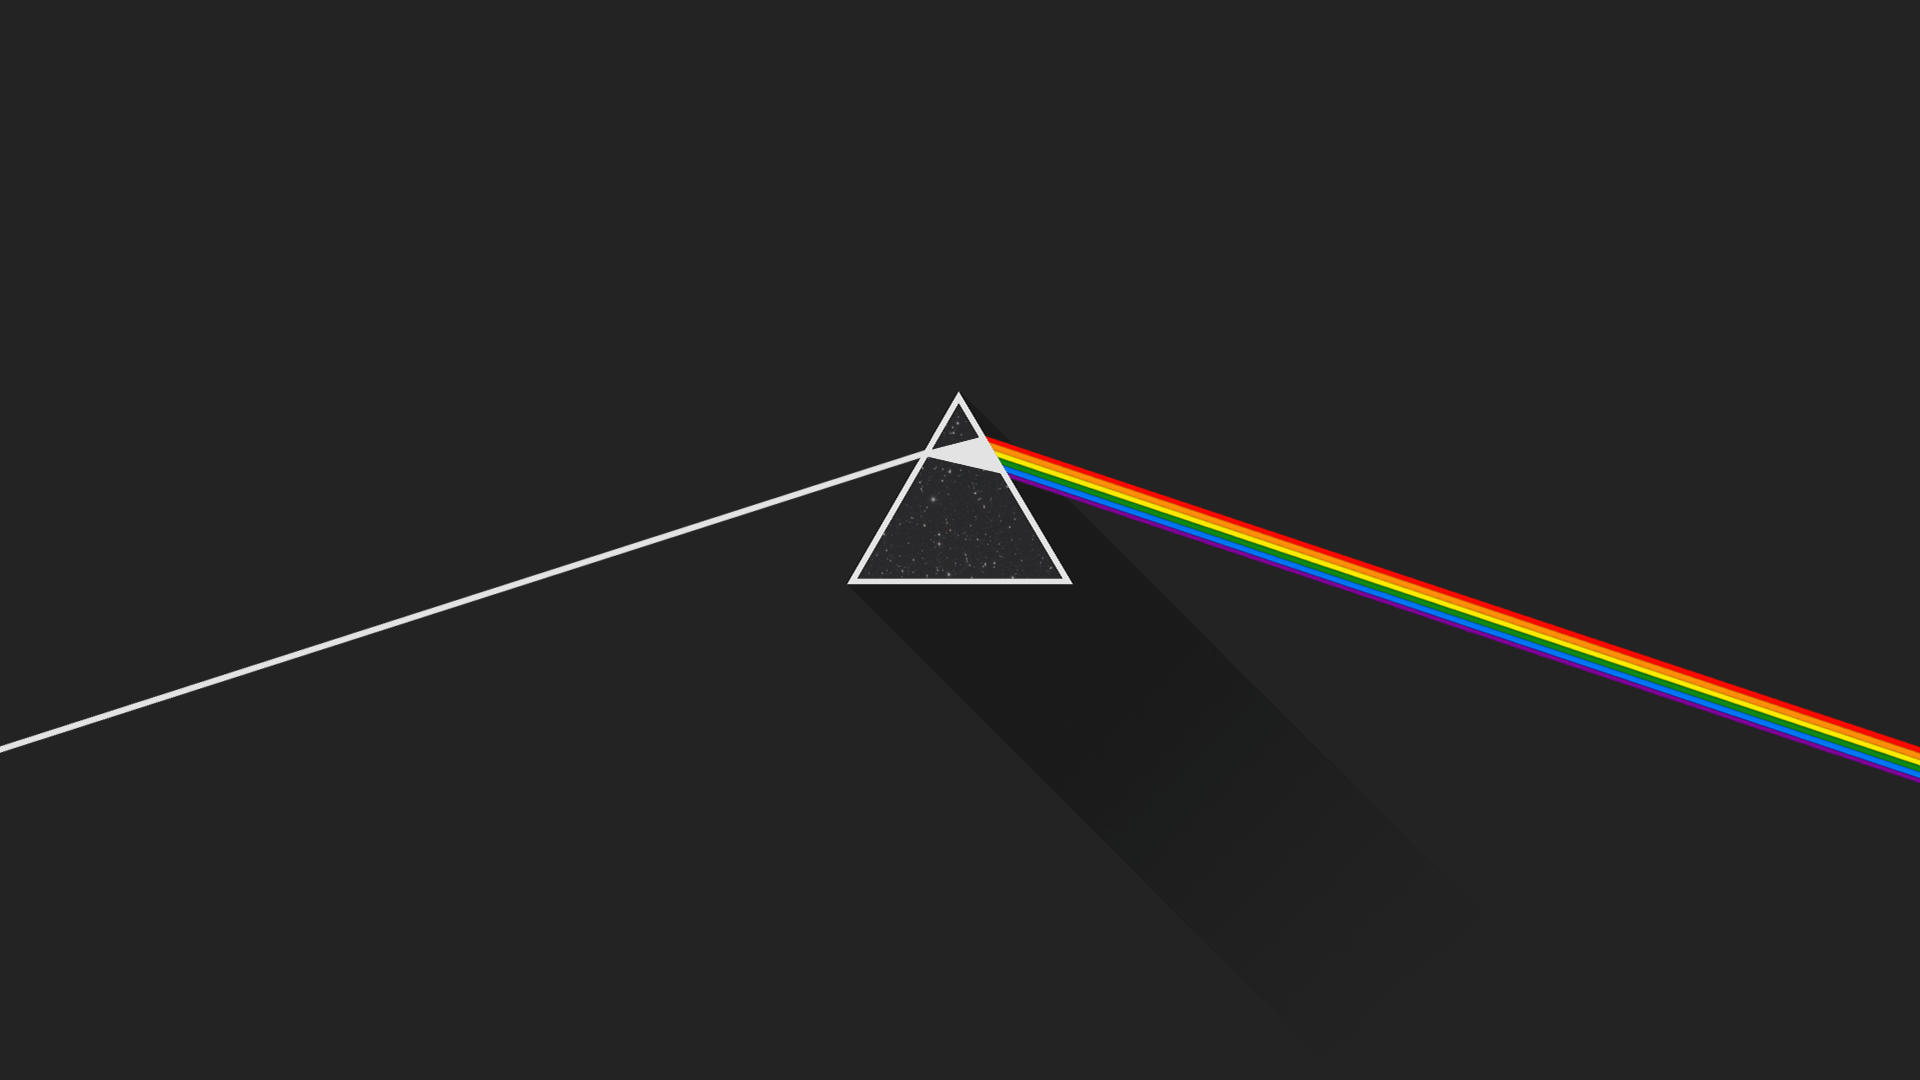 Pink Floyd Prism Wallpaper by HD Wallpaper Daily